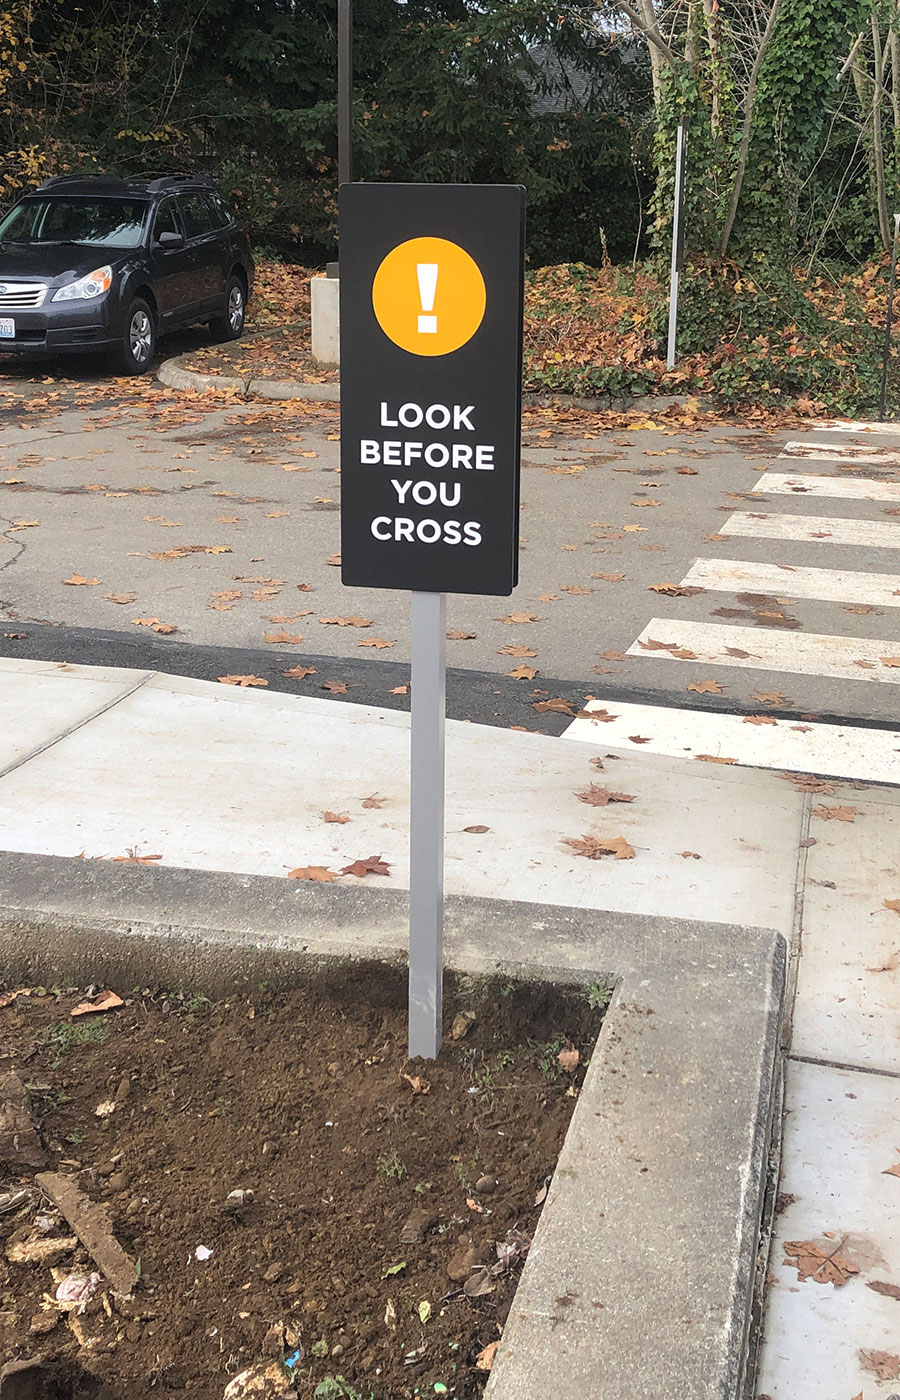 Wayfinding and directional signs were fabricated and installed for parking lots and exterior walkways.